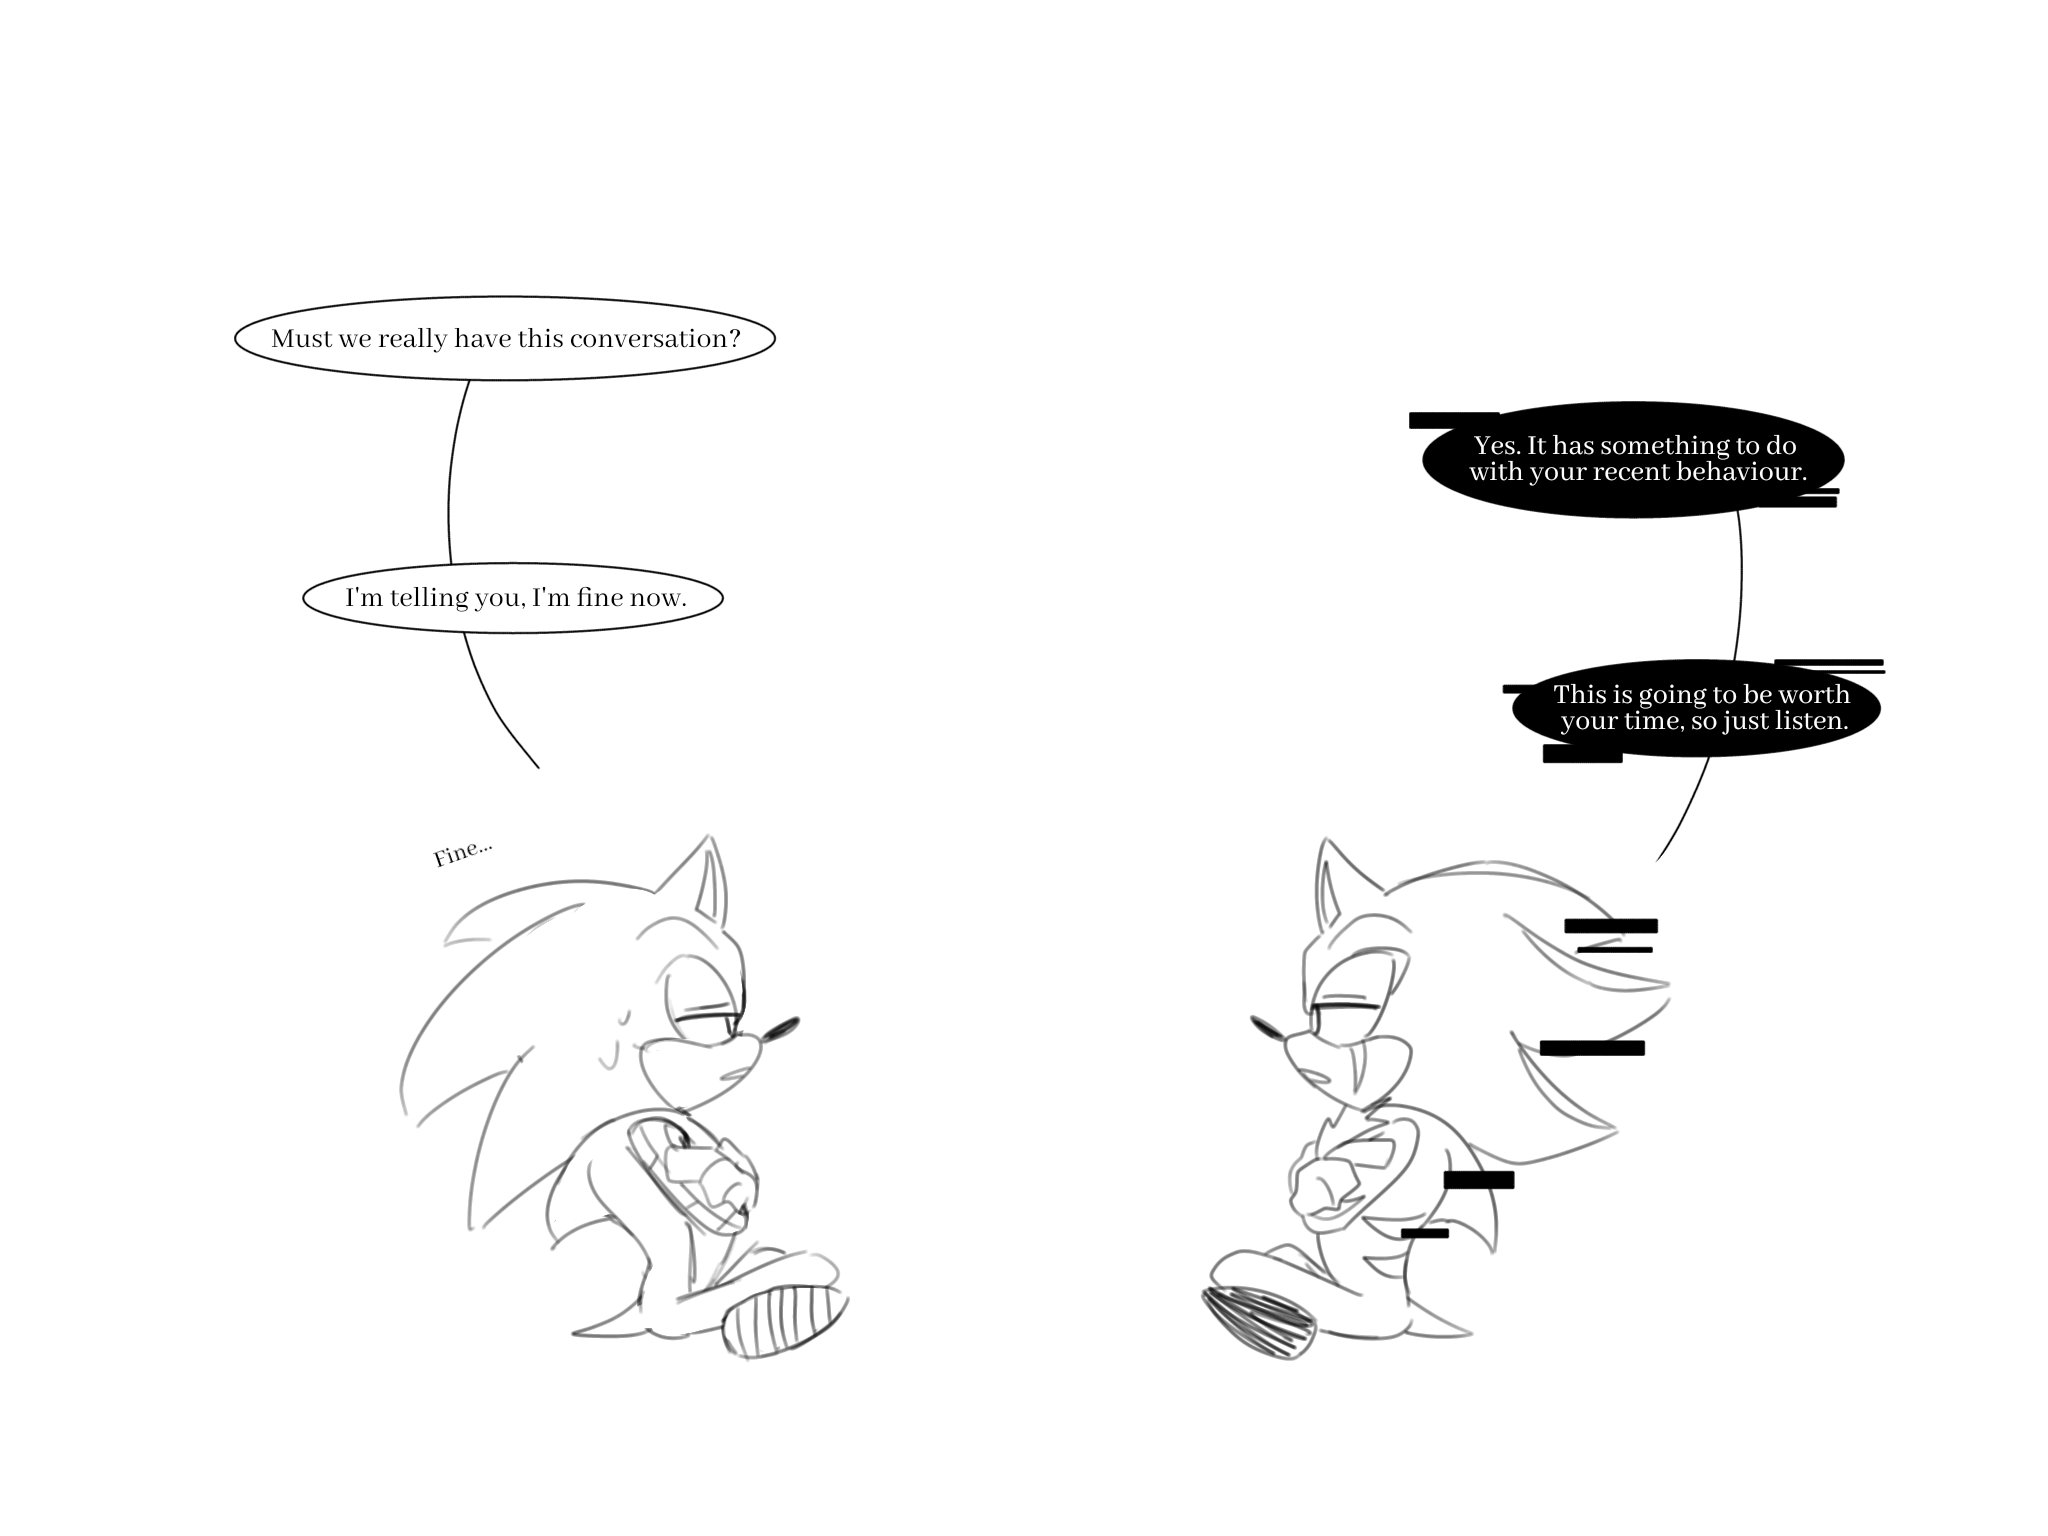 Closer (But maybe a little too much) -- Sonadow/Shadonic - Chapter